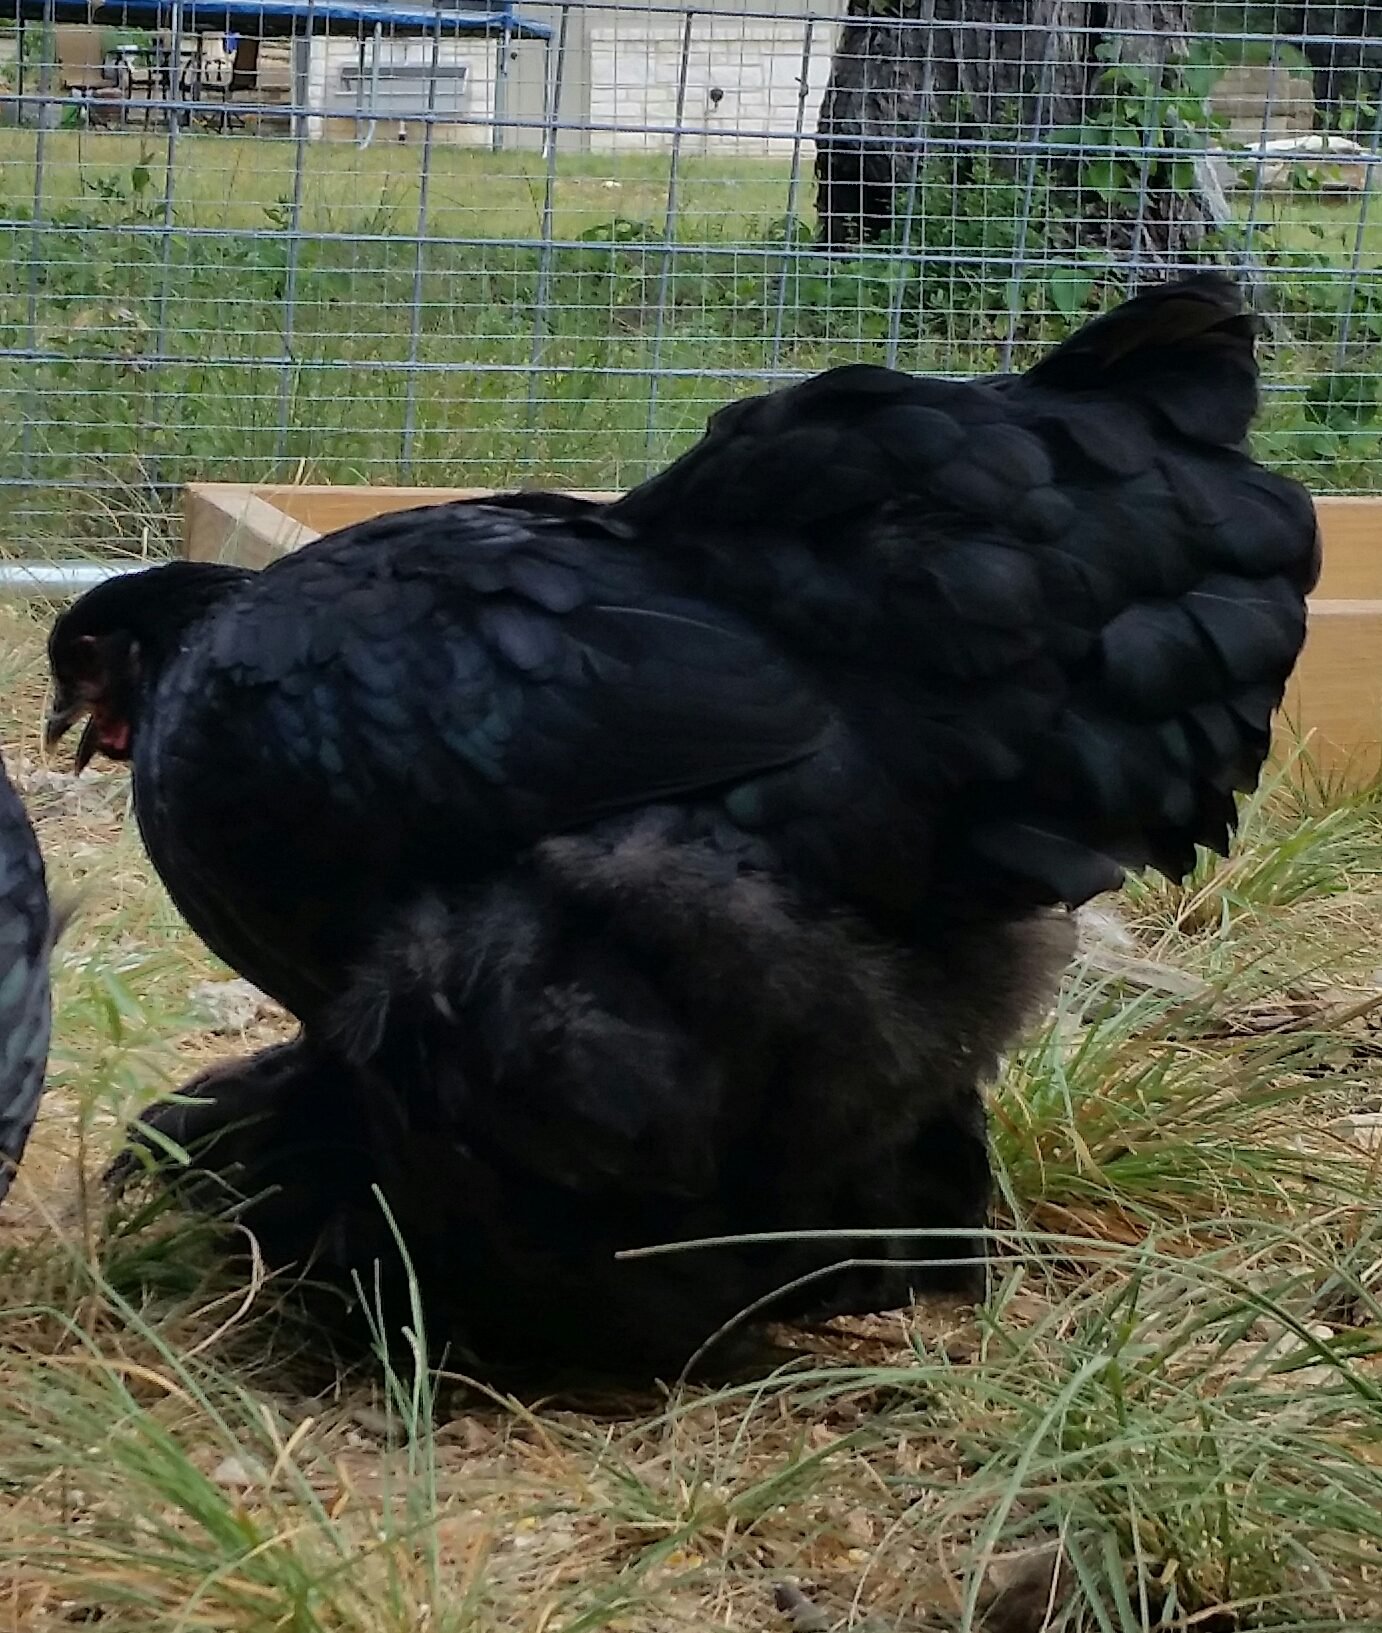 Two black chickens - one fluffy, one with iridescent blue in ...